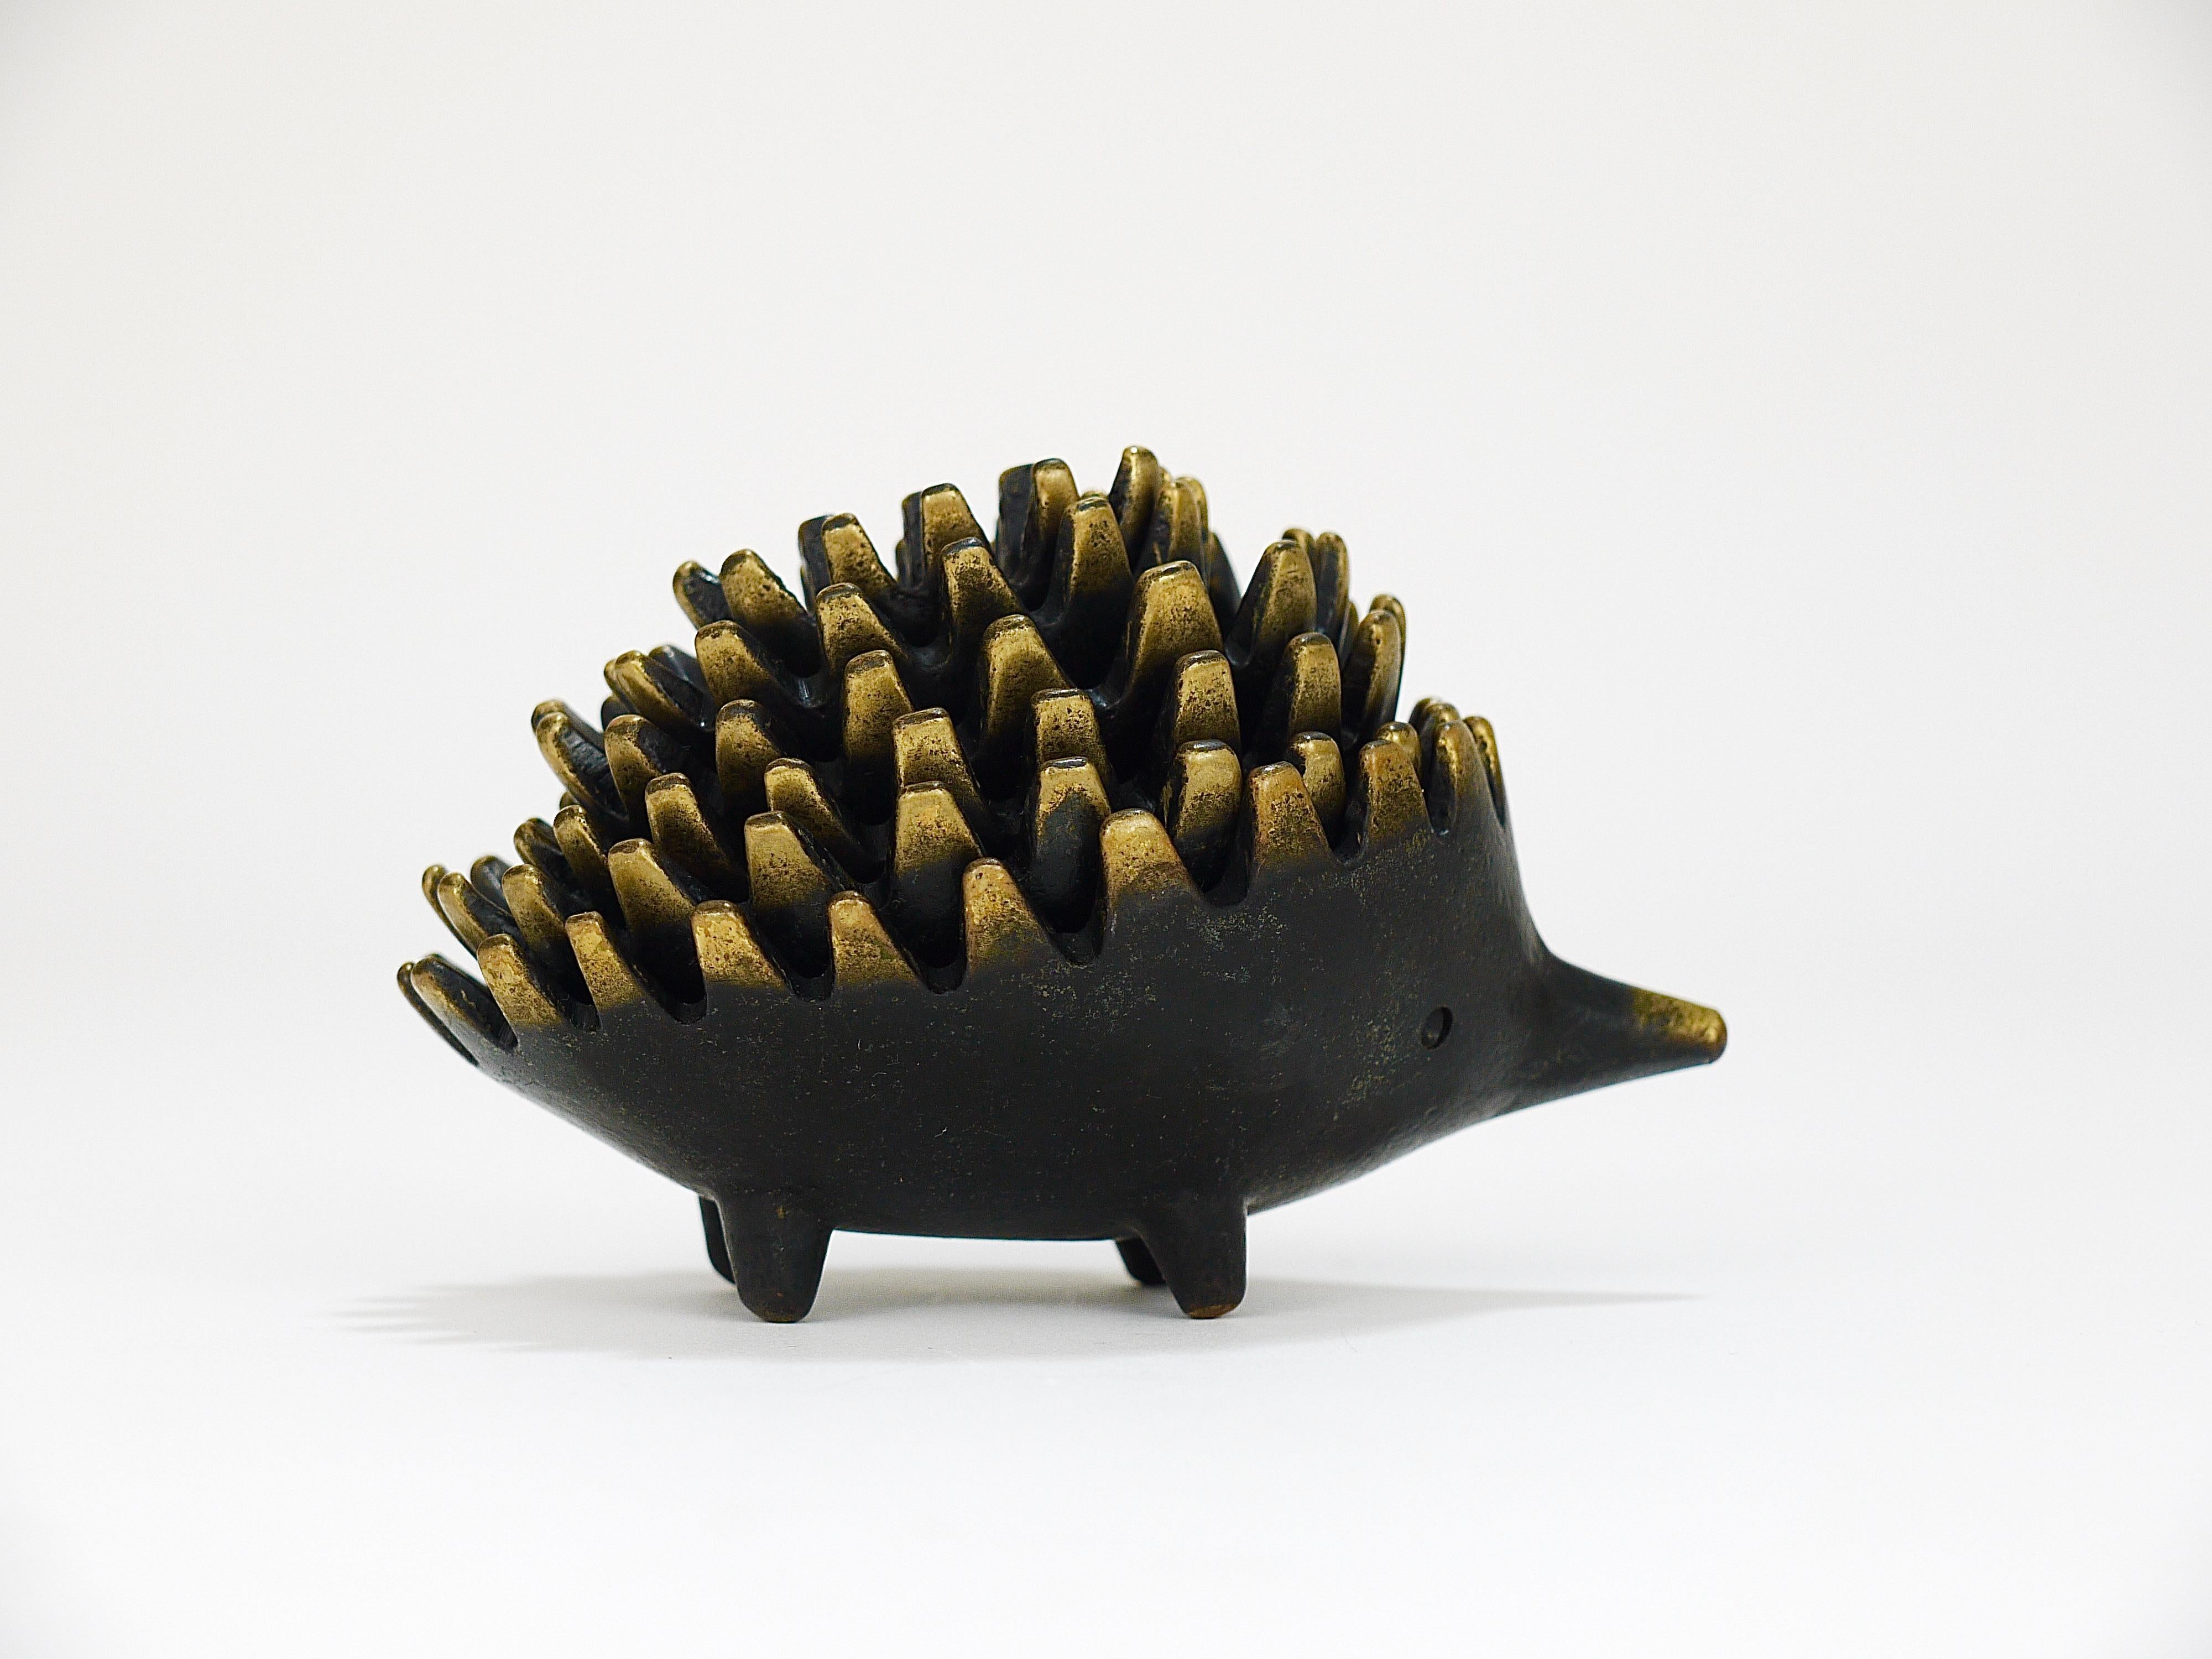 A complete set of six vintage stackable midcentury hedgehog ashtrays. A very humorous and charming design by Walter Bosse, executed by Hertha Baller, Austria in the 1950s. Made of brass, in remarkable above-average good condition.